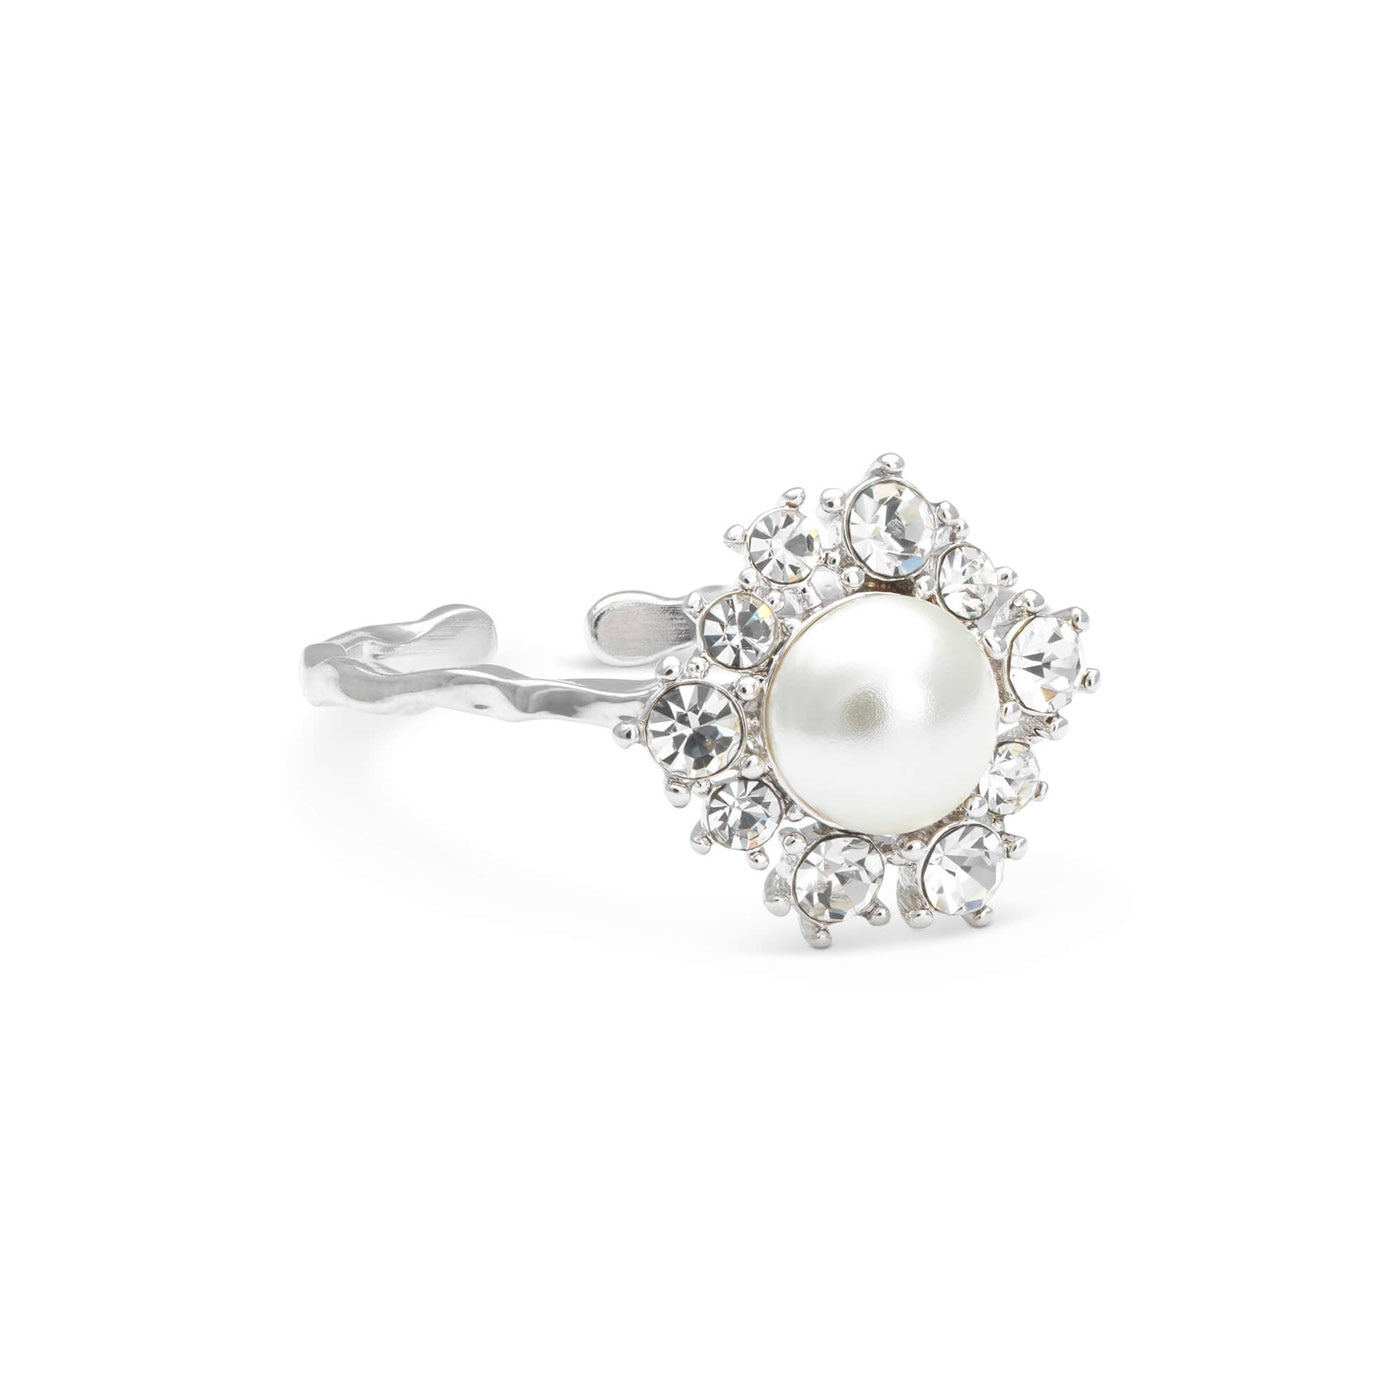 Emily pearl ring - Ivory